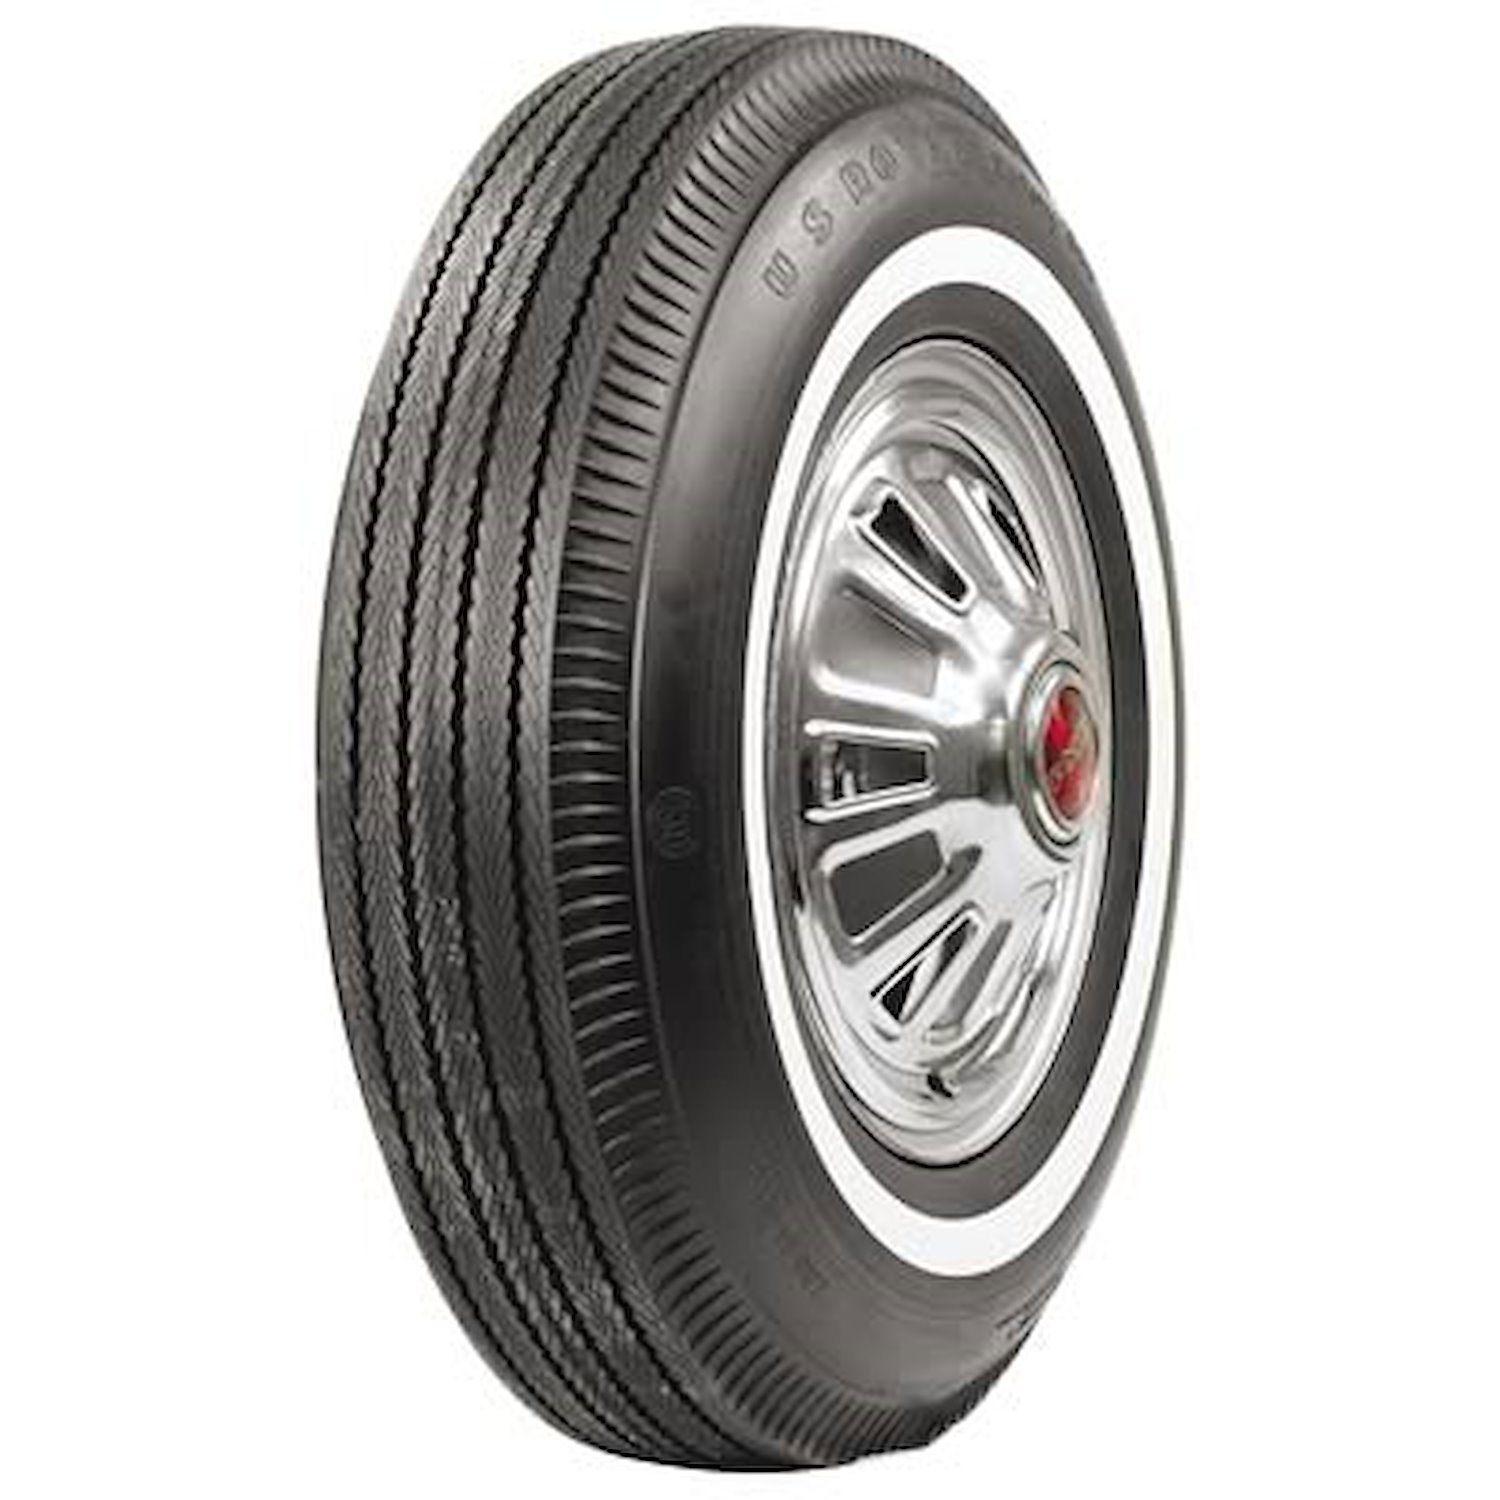 57620 Tire, US Royal 1.00-Inch Whitewall, 670-15